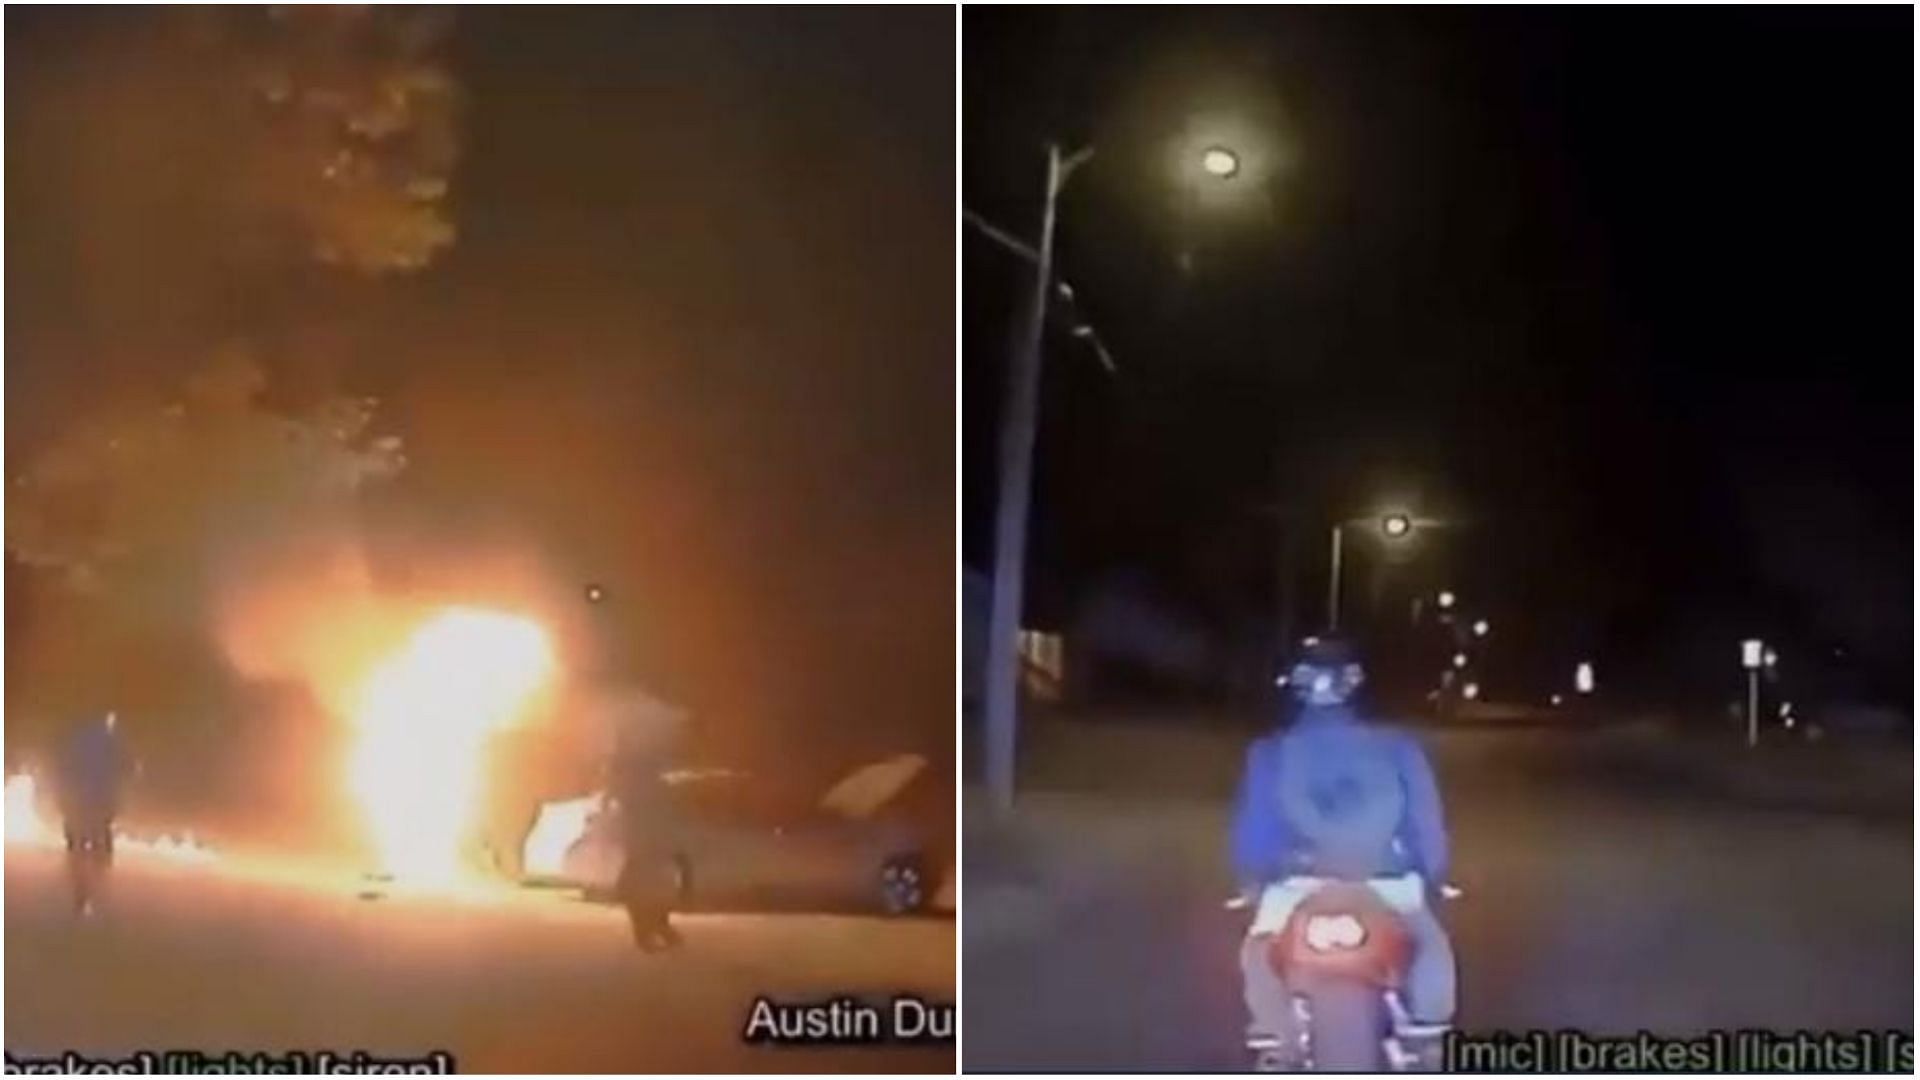 Arkansas man in hospital after catching fire in the middle of a police chase (Screen shots from a police dash cam footage)